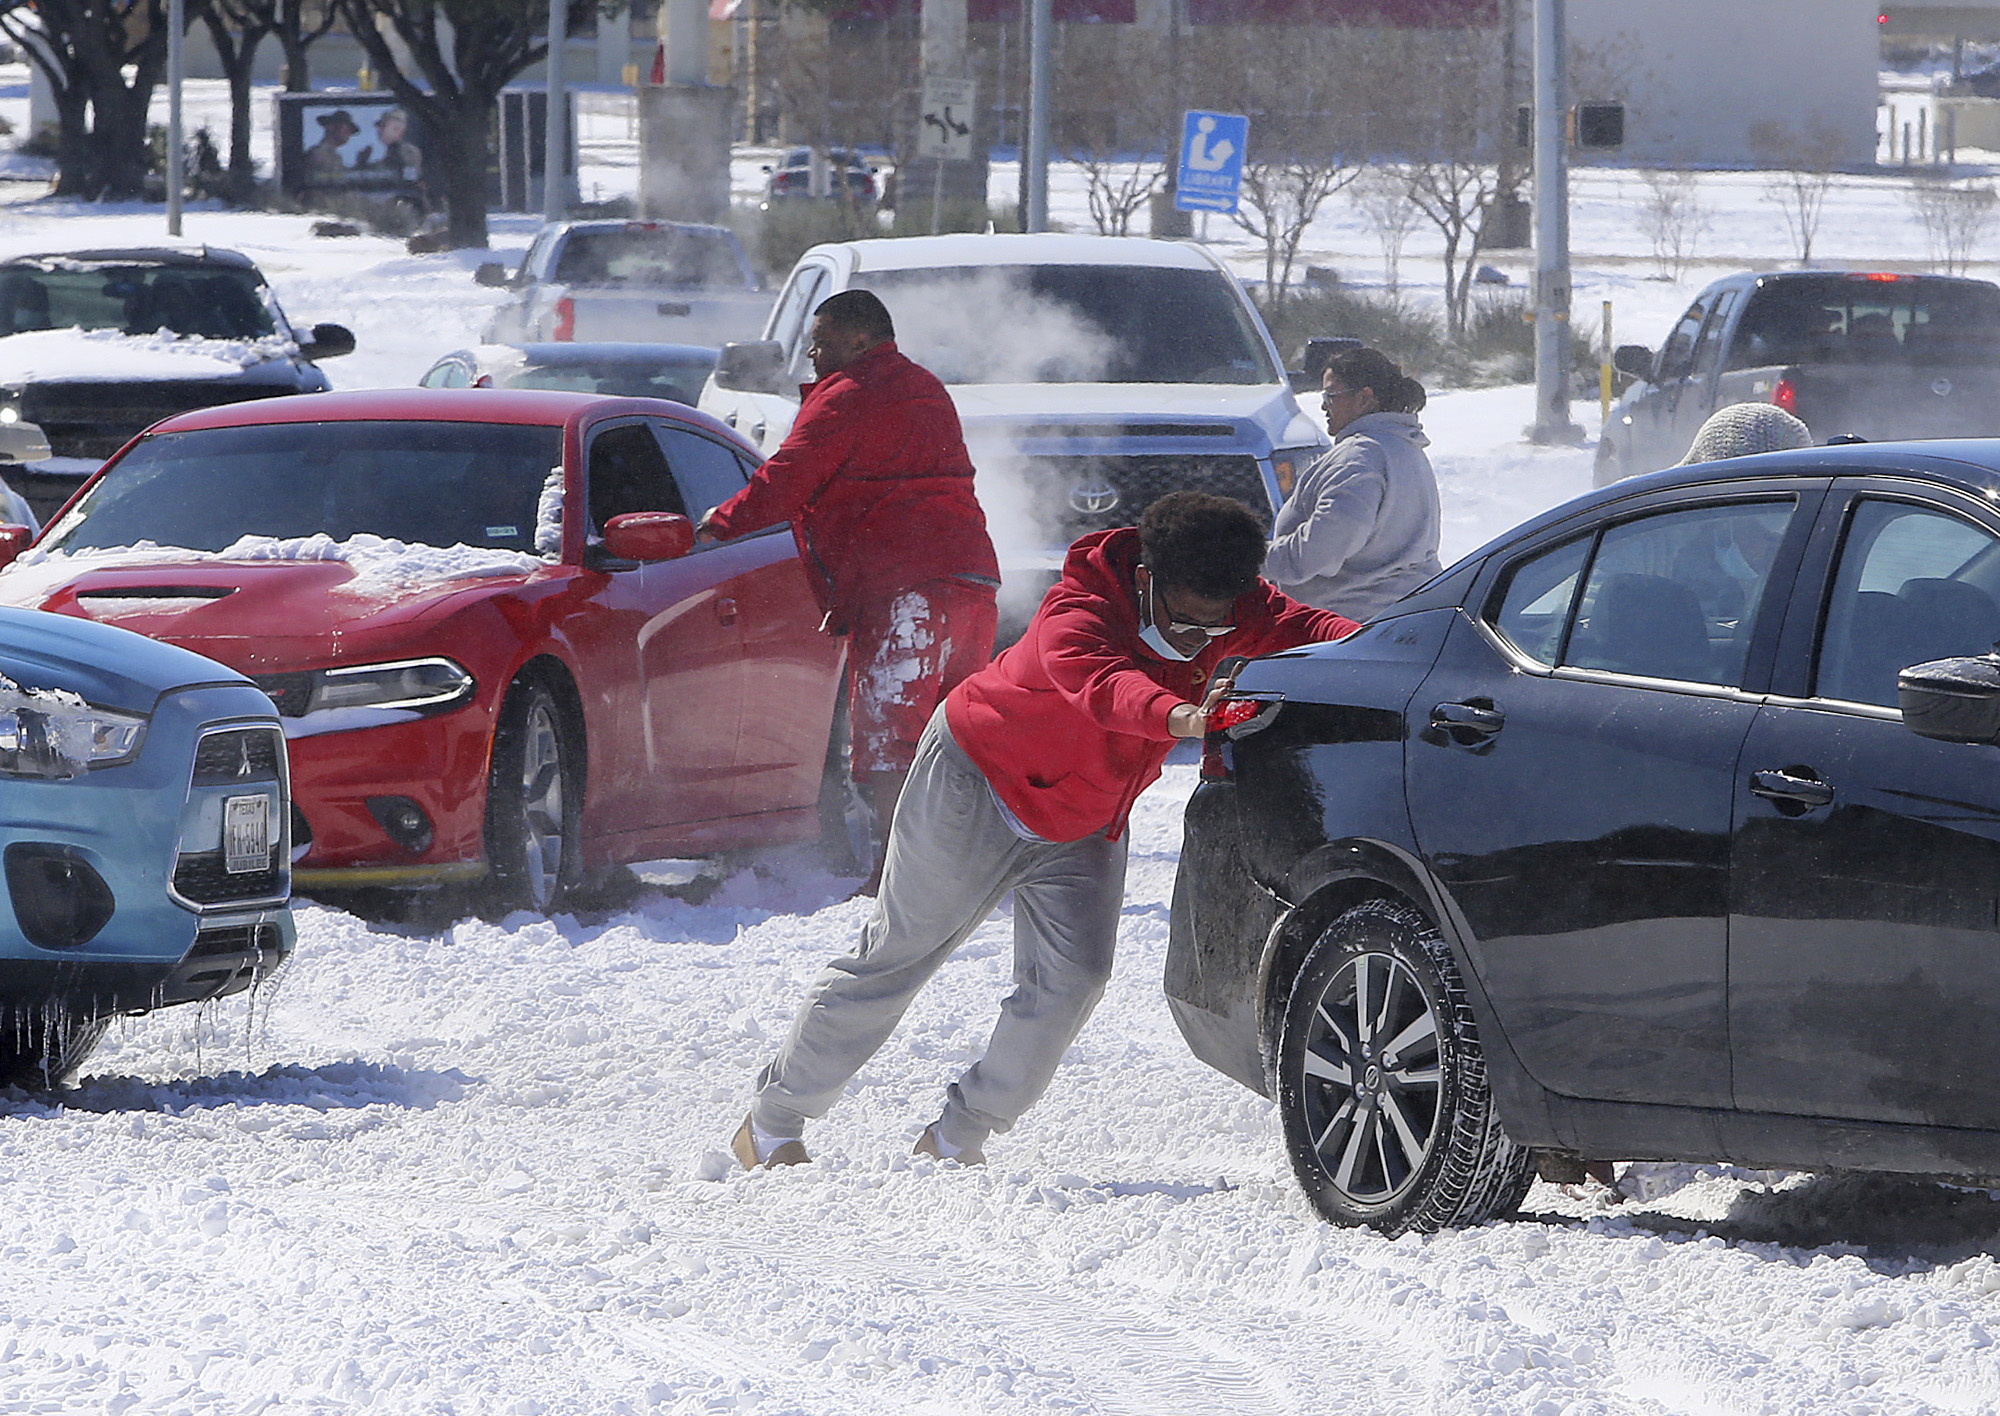 PHOTO: People push a car free after spinning out in the snow on Feb. 15, 2021, in Waco, Texas.